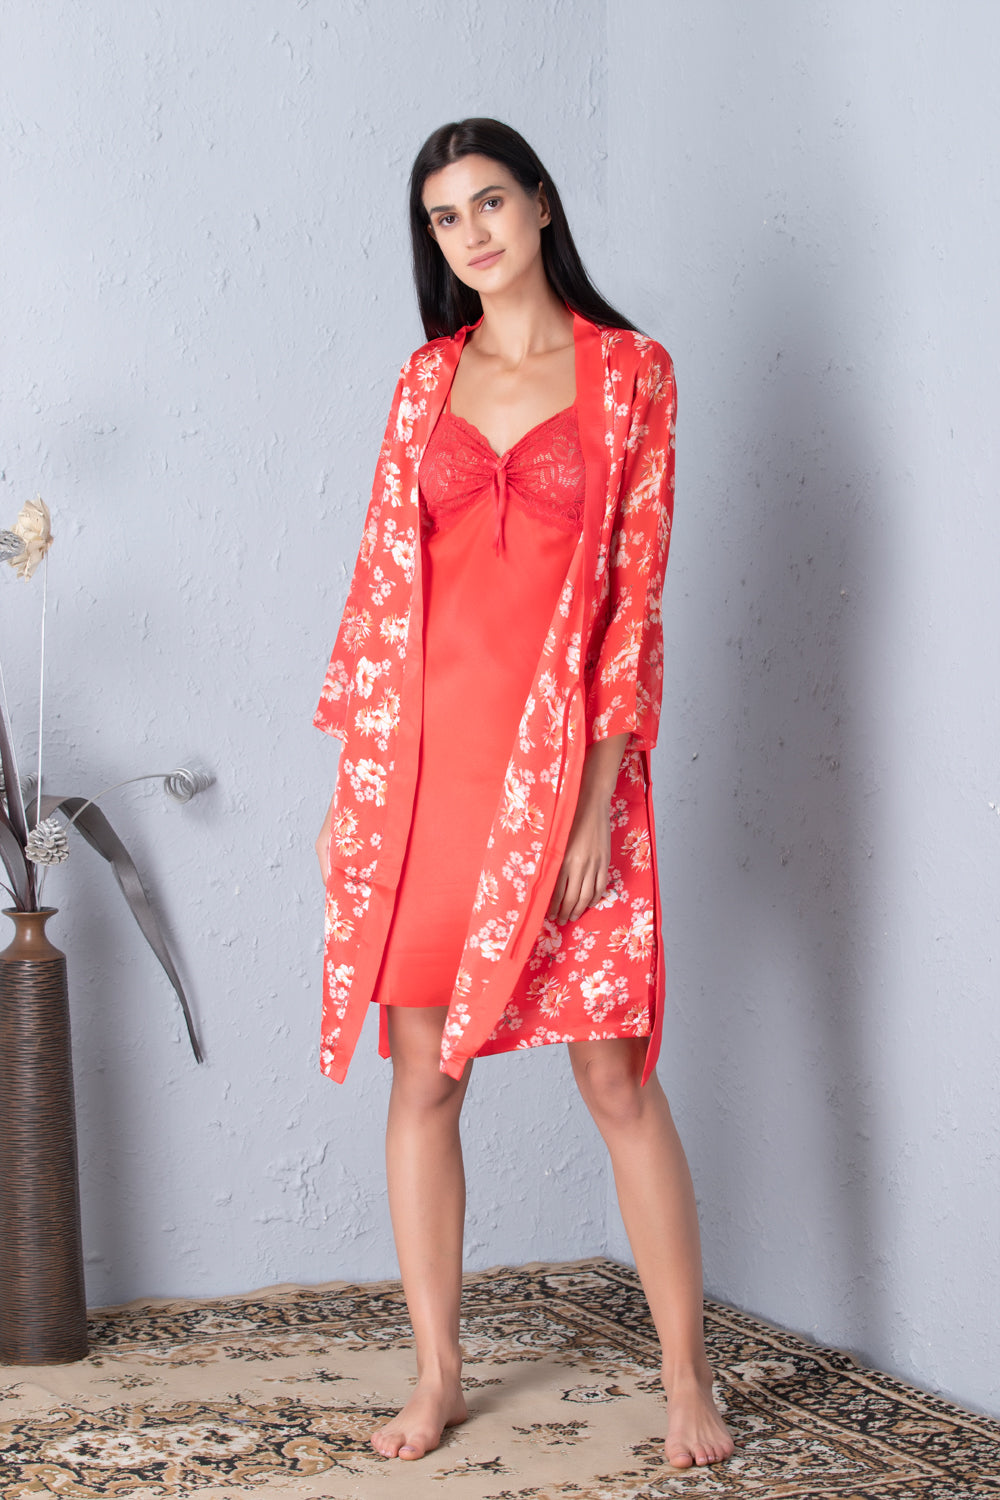 Plain satin Babydoll with chiffon robe Nightgown set - Private Lives